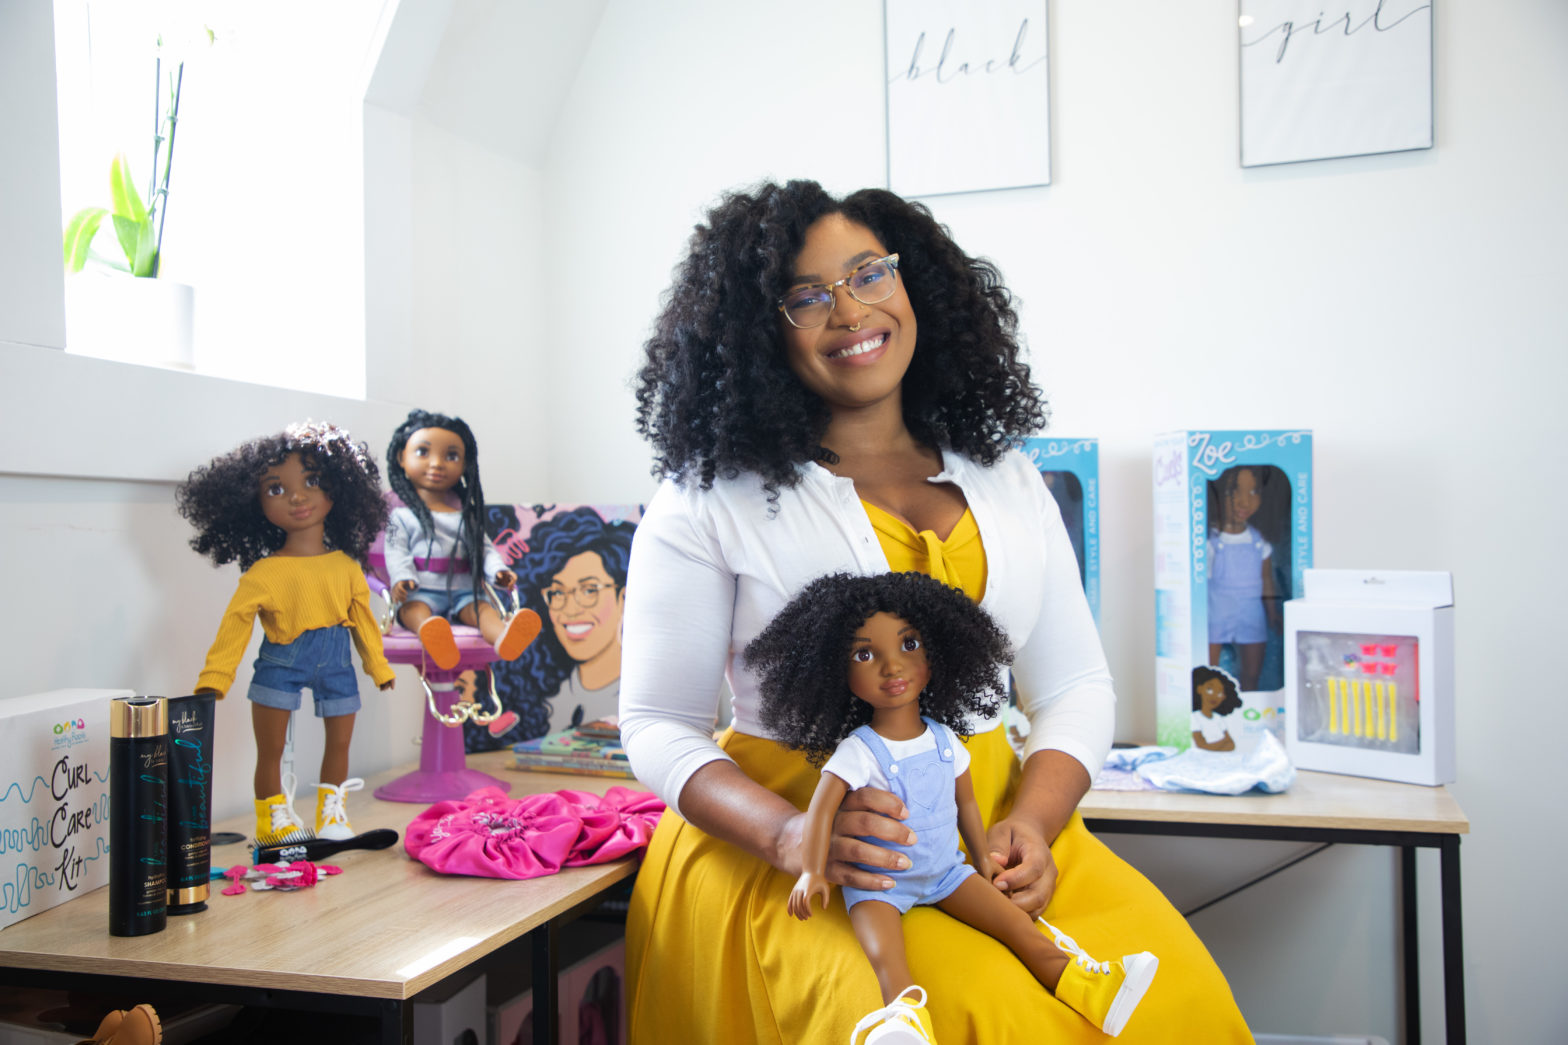 How Yelitsa Jean-Charles' Healthy Roots Dolls Can Serve As A Blueprint For The Billion-Dollar Toy Industry